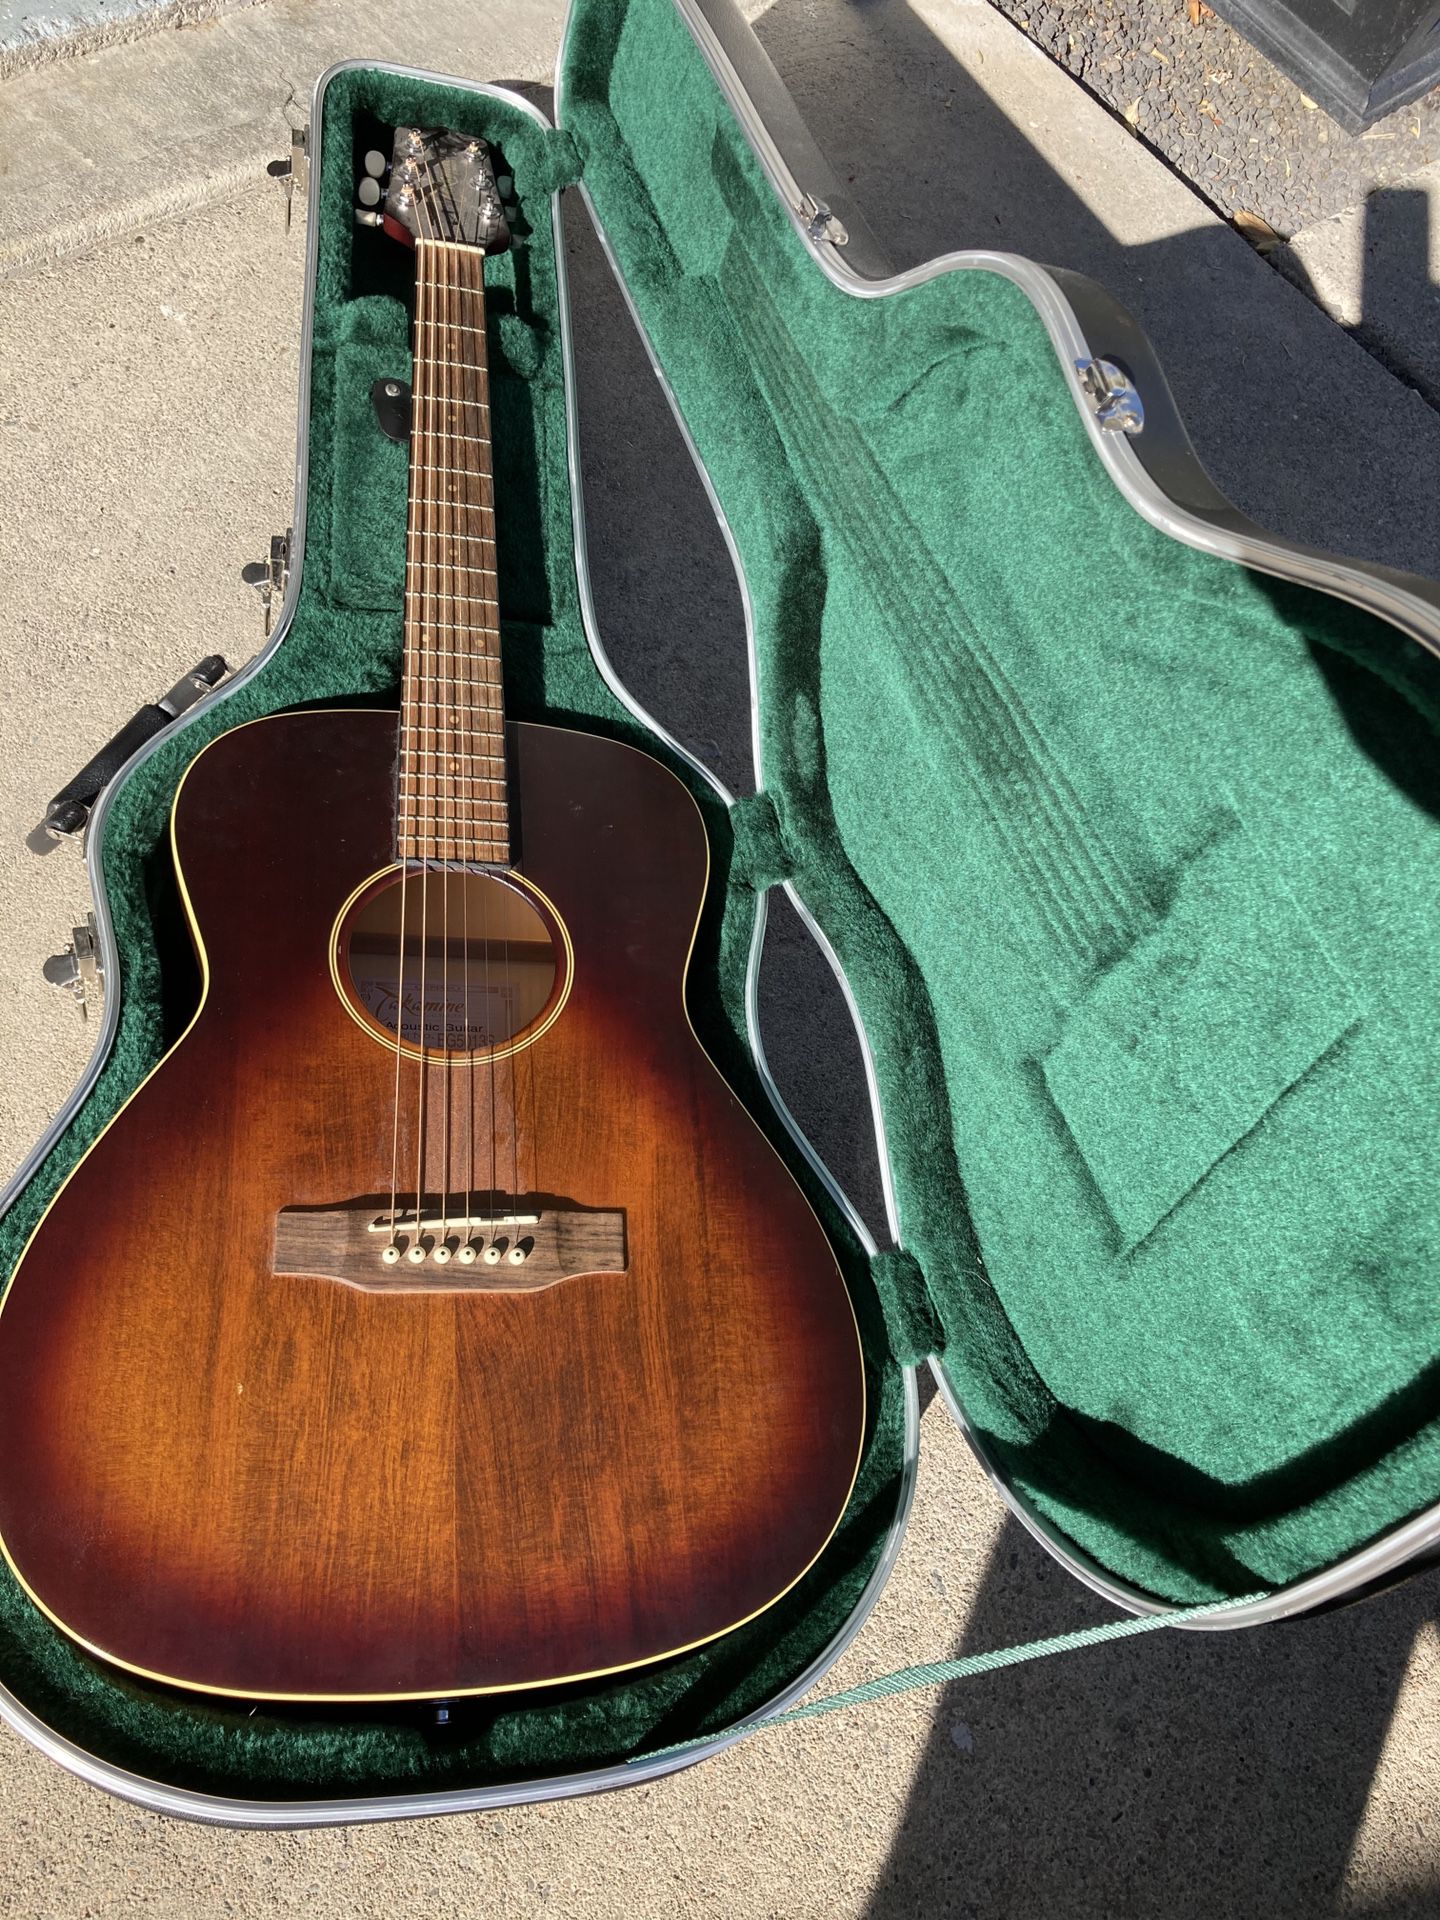 Excellent condition guitar and case